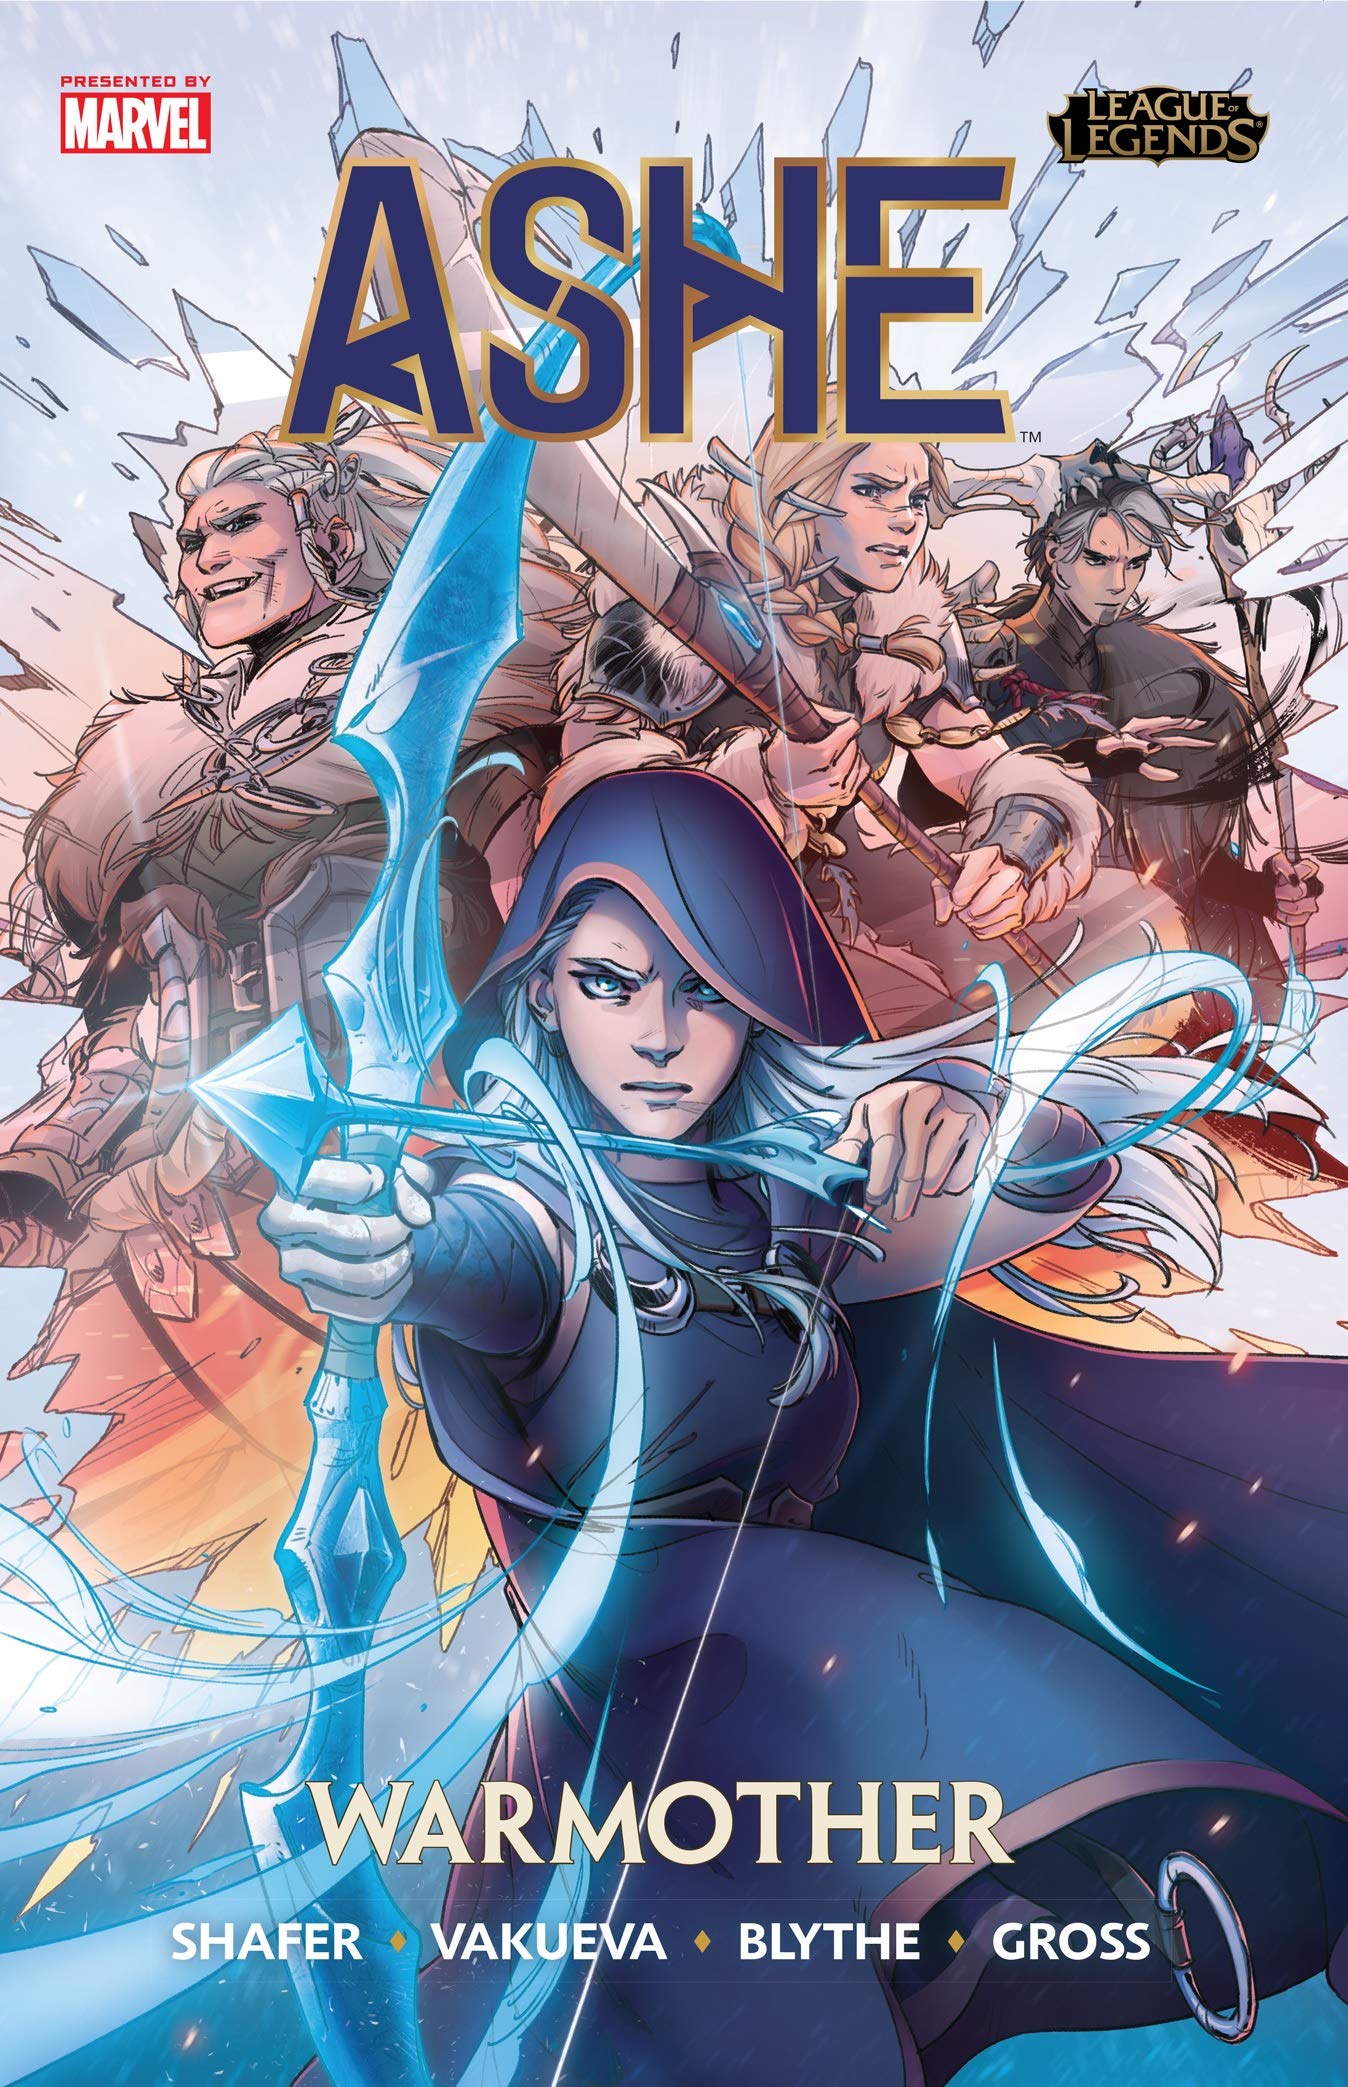 League Of Legends: Ashe - Warmother Paperback - Graphic Novel - The Hooded Goblin